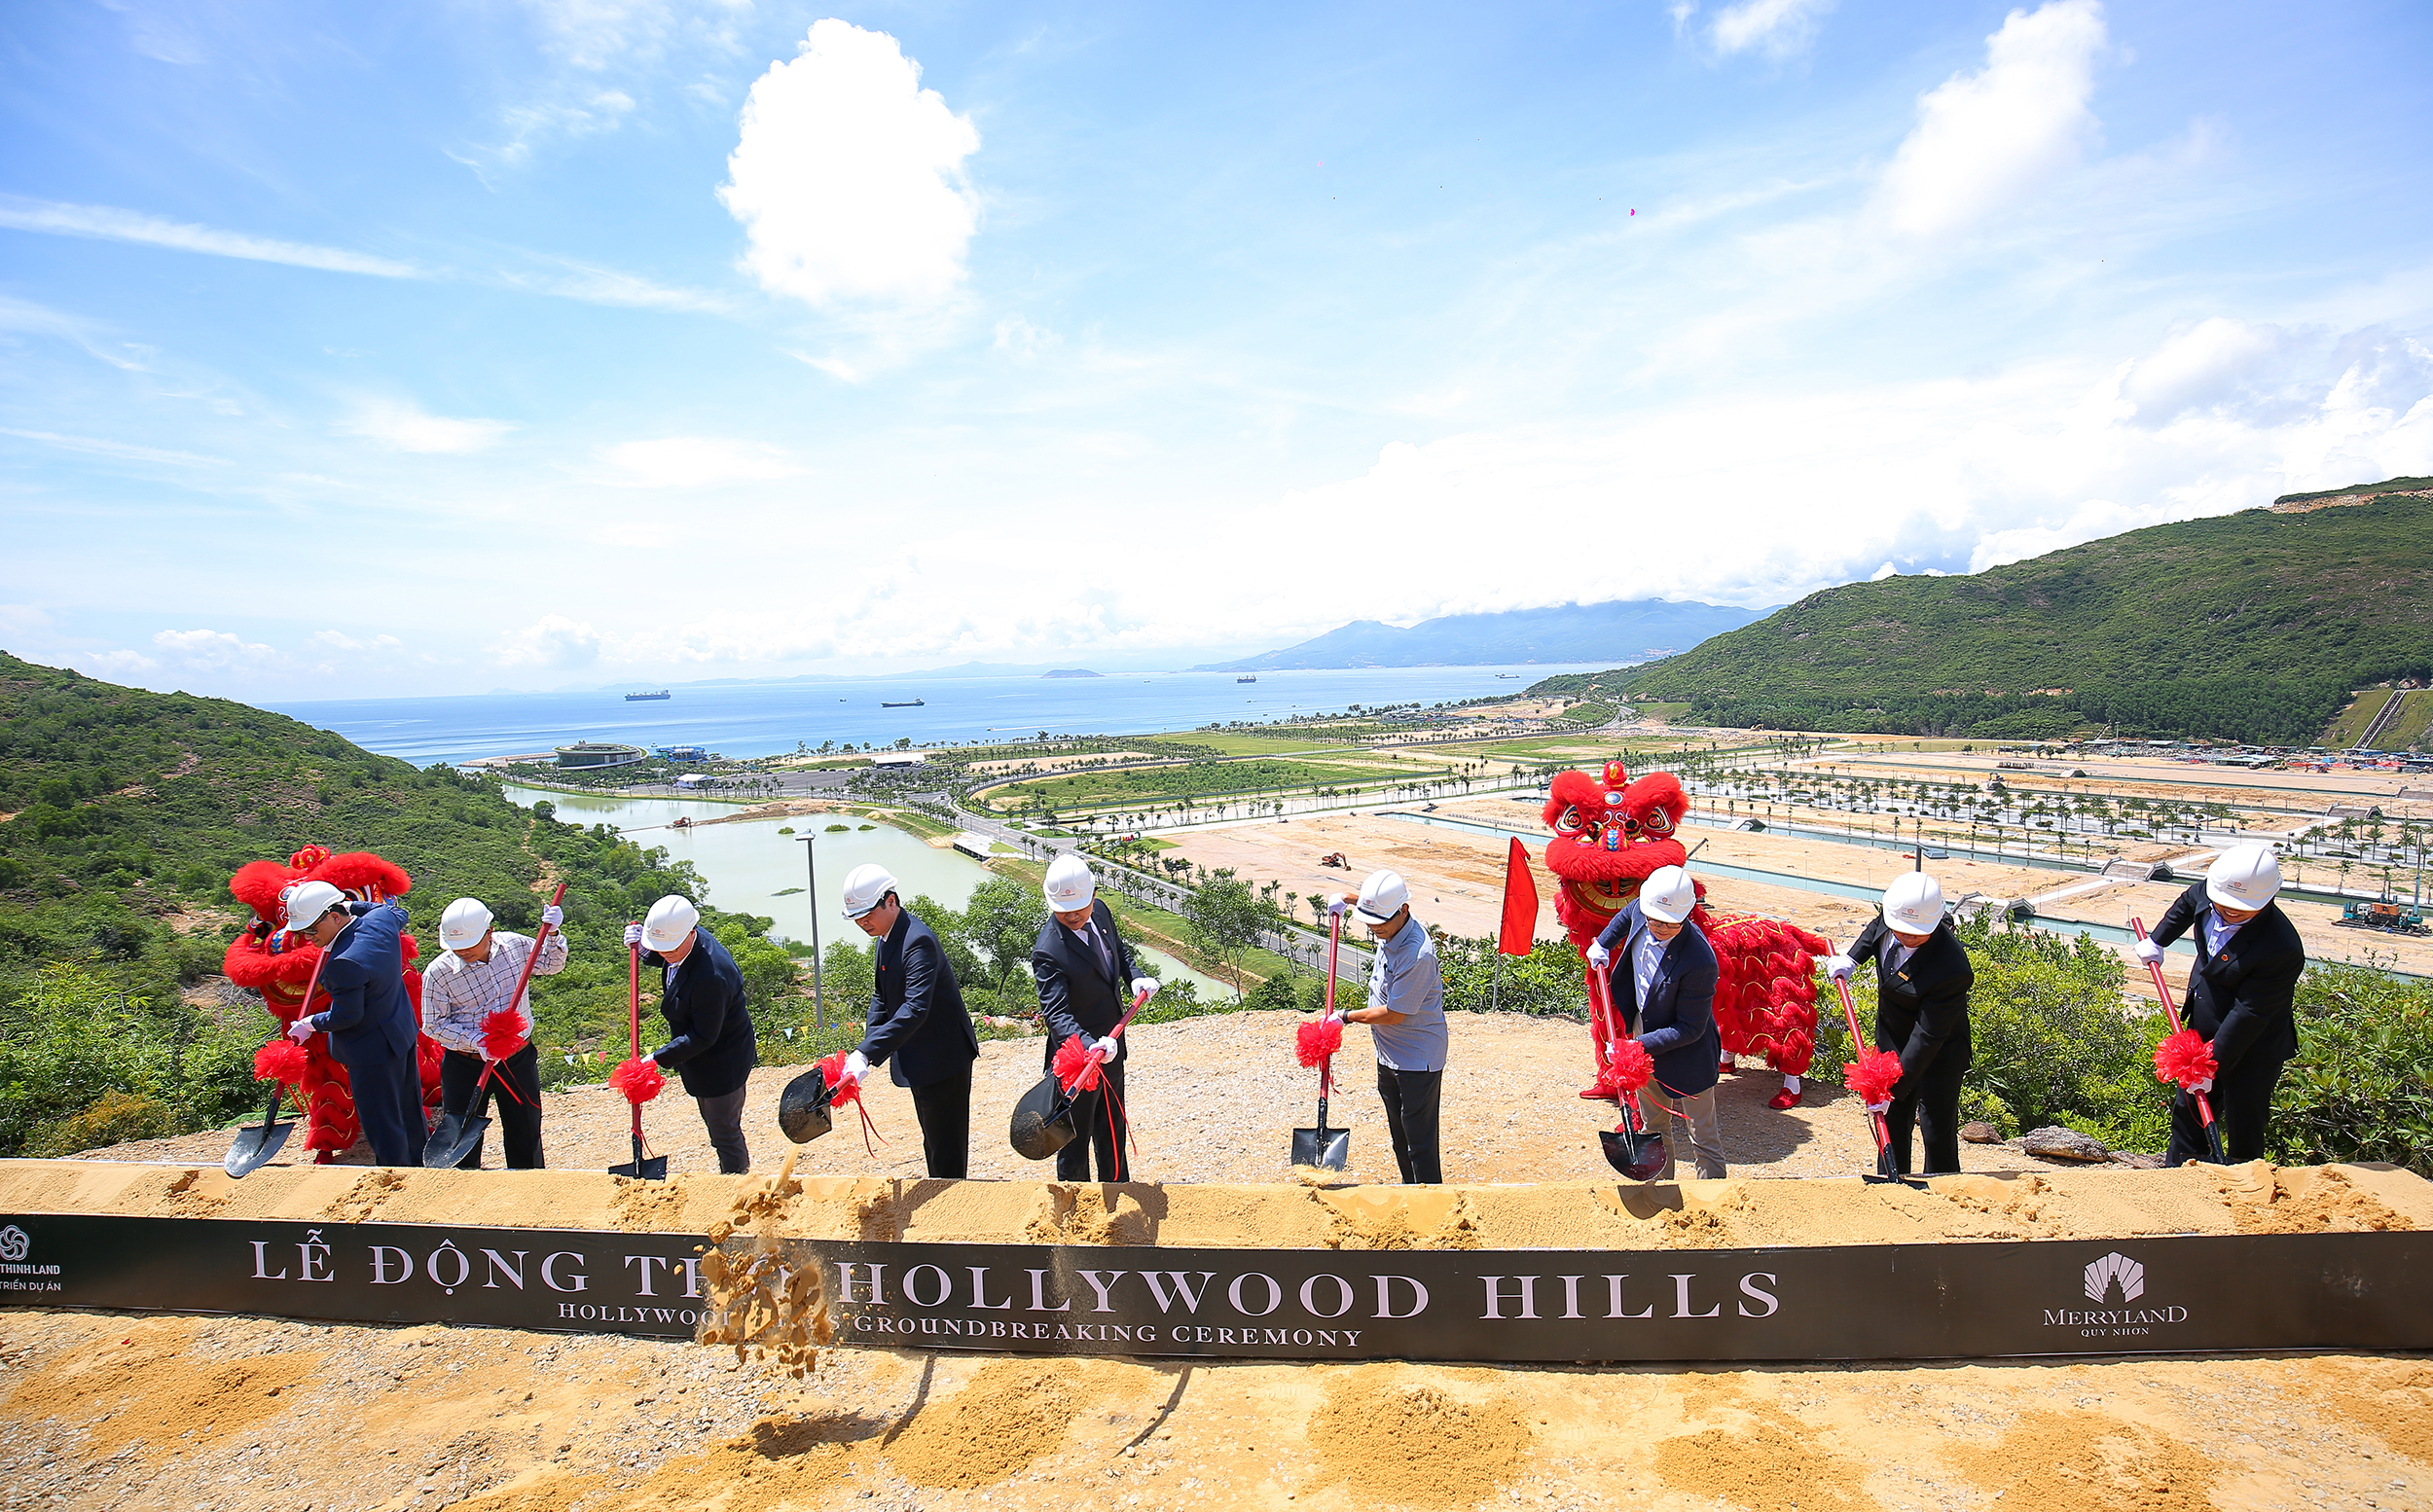 HUNG THINH CORPORATION HOLDS GROUND-BREAKING CEREMONY OF HOLLYWOOD HILLS SUBDIVISION BY YOO INSPIRED BY STARCK SUBDIVISION AT MERRYLAND QUY NHON